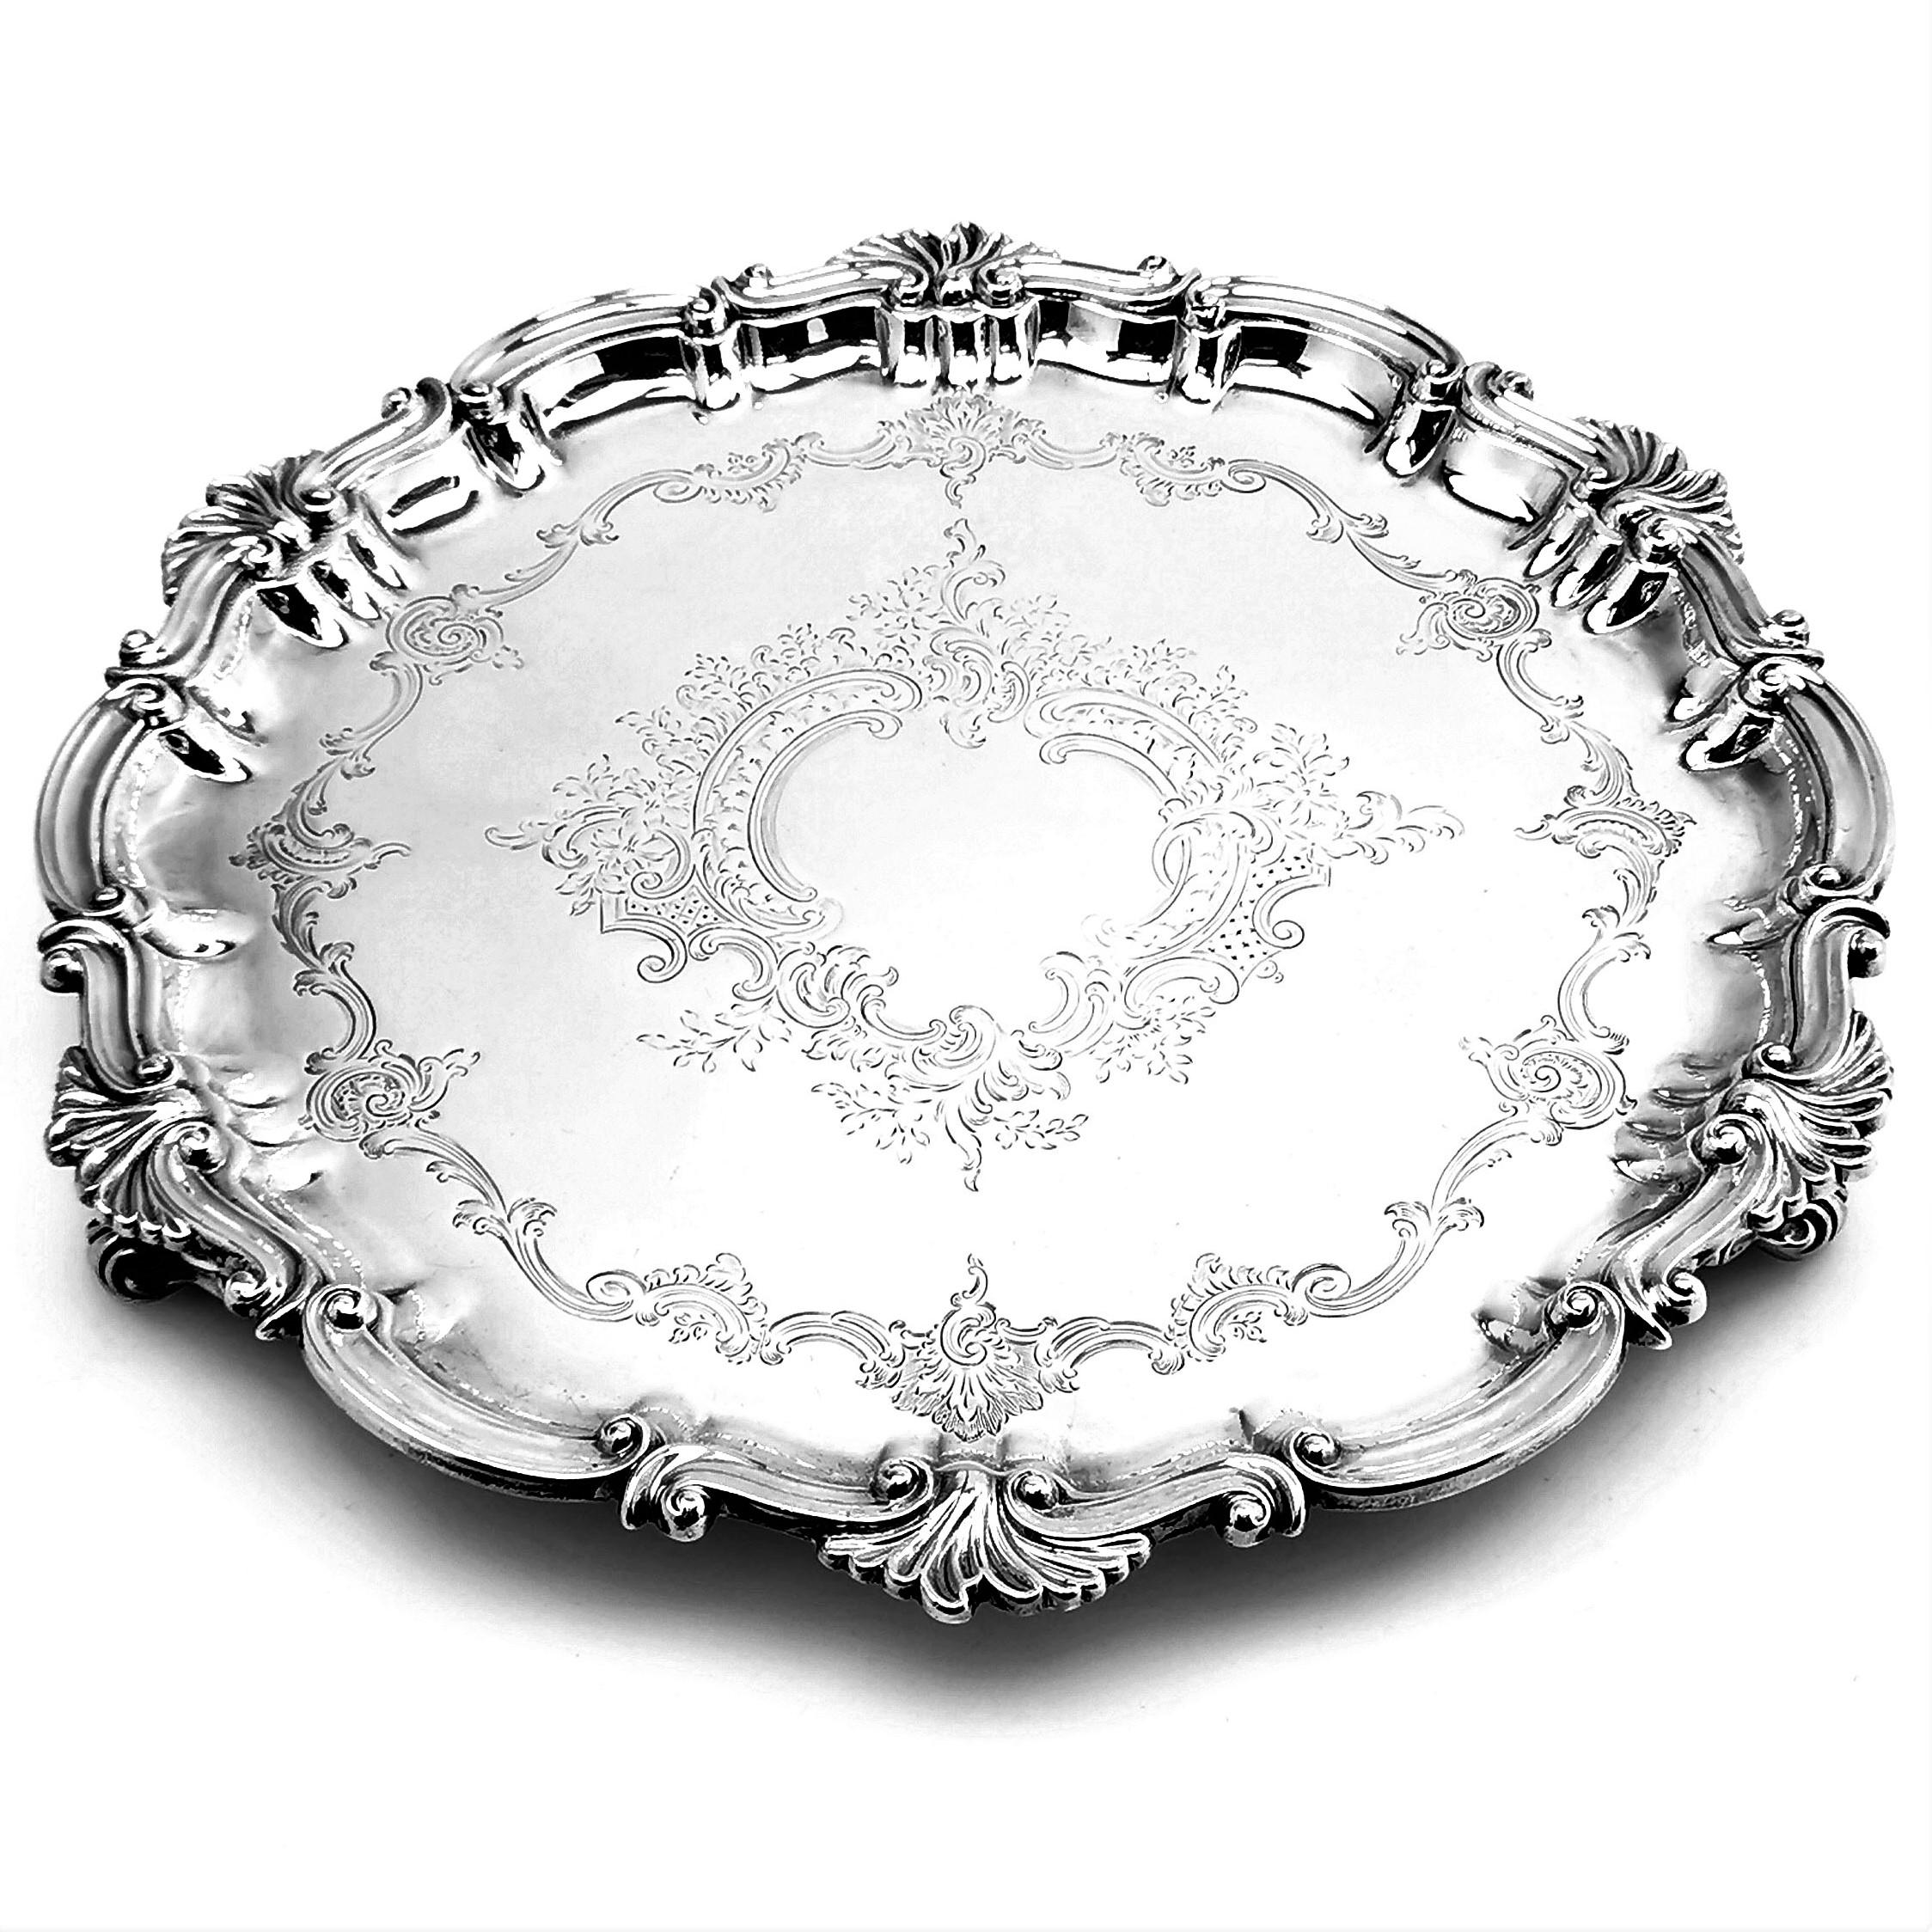 An antique Victorian solid silver Salver. This round Salver has an ornate border and features an engraved design on the inside. The salver stands on three scroll feet.

Made in London in 1896 by Thomas Bradbury & Sons.

Approx. Weight - 1074g /